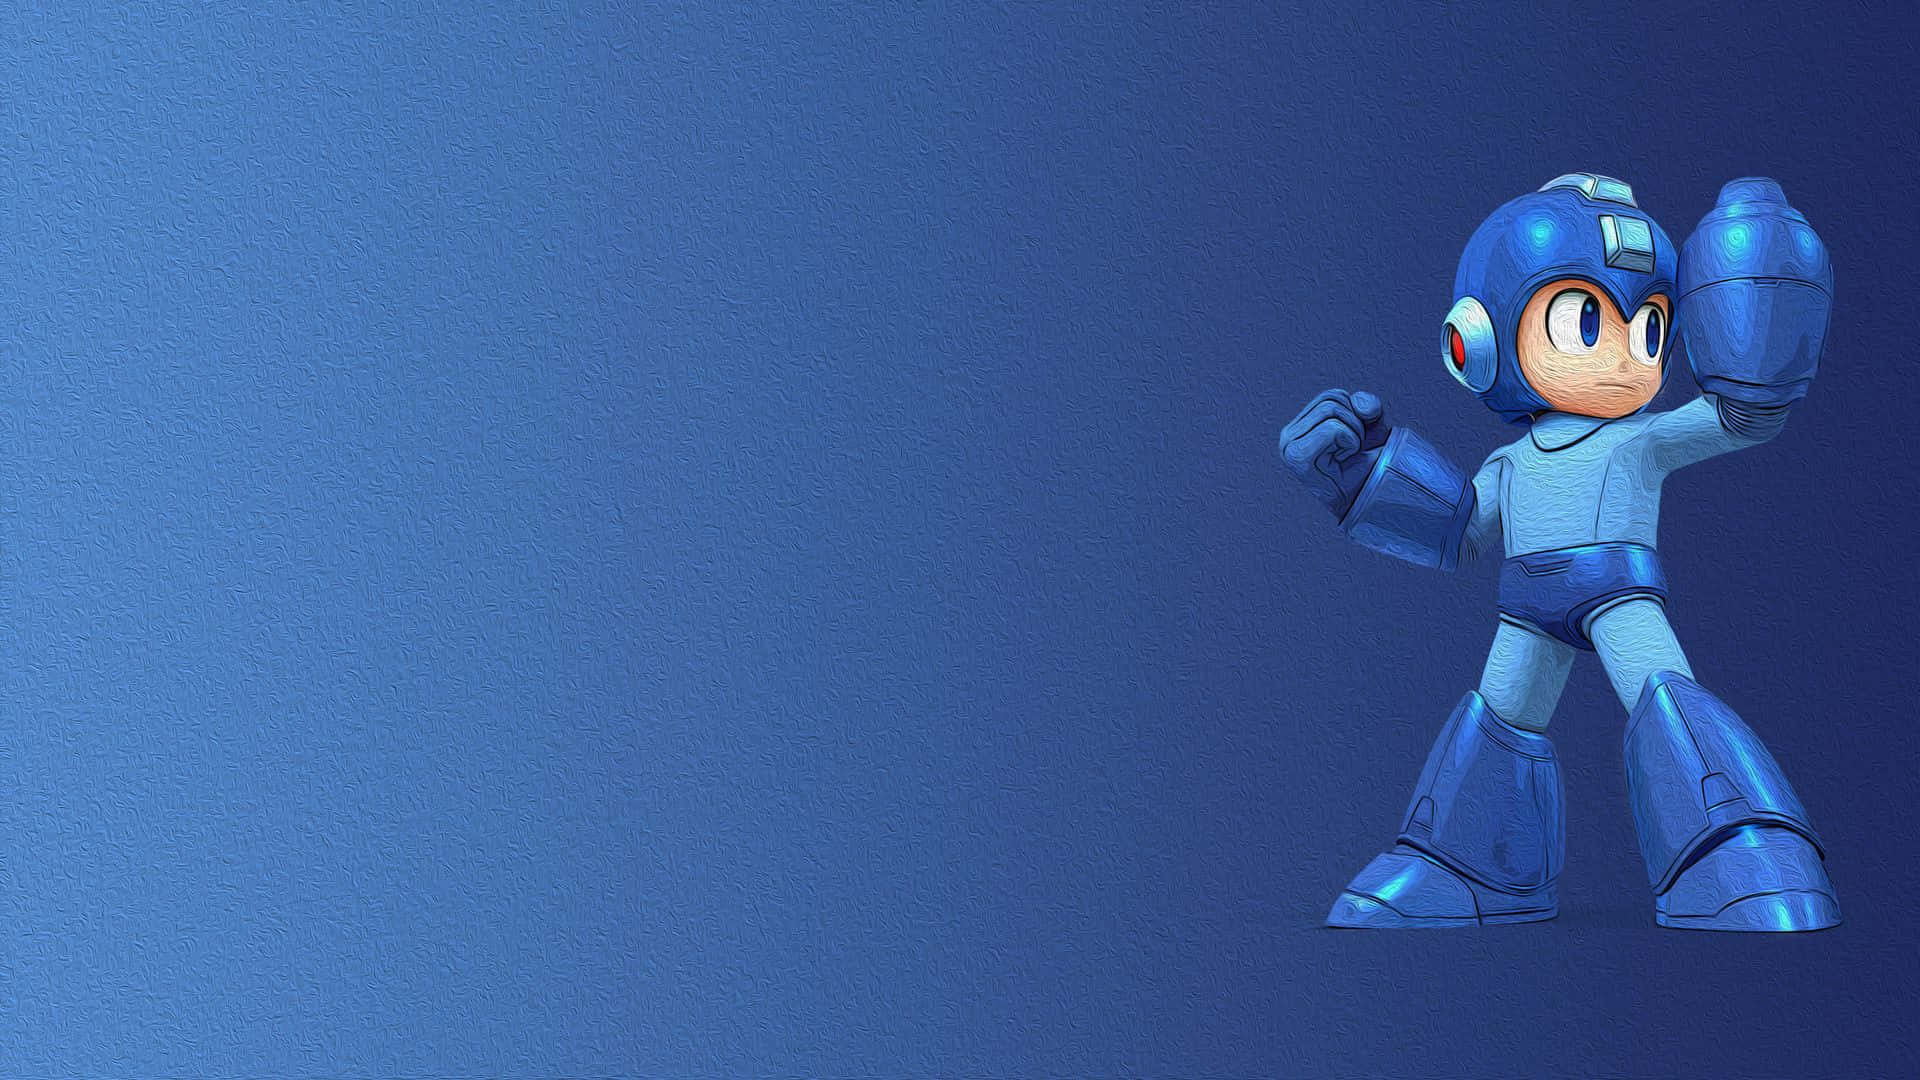 Mega Man: The iconic video game character Wallpaper